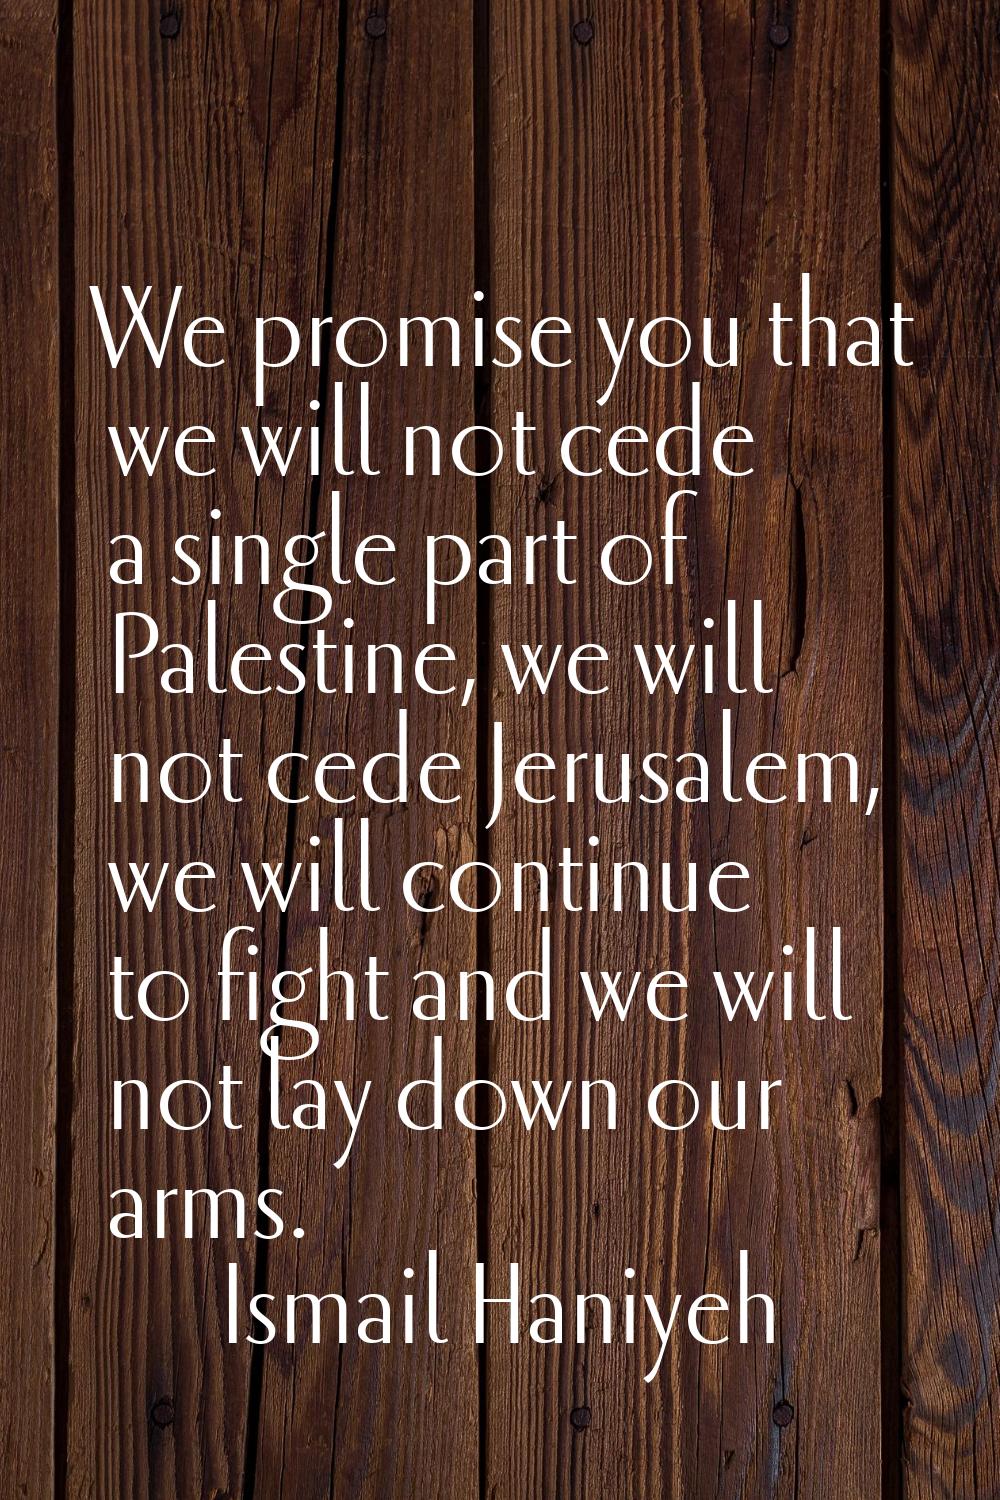 We promise you that we will not cede a single part of Palestine, we will not cede Jerusalem, we wil